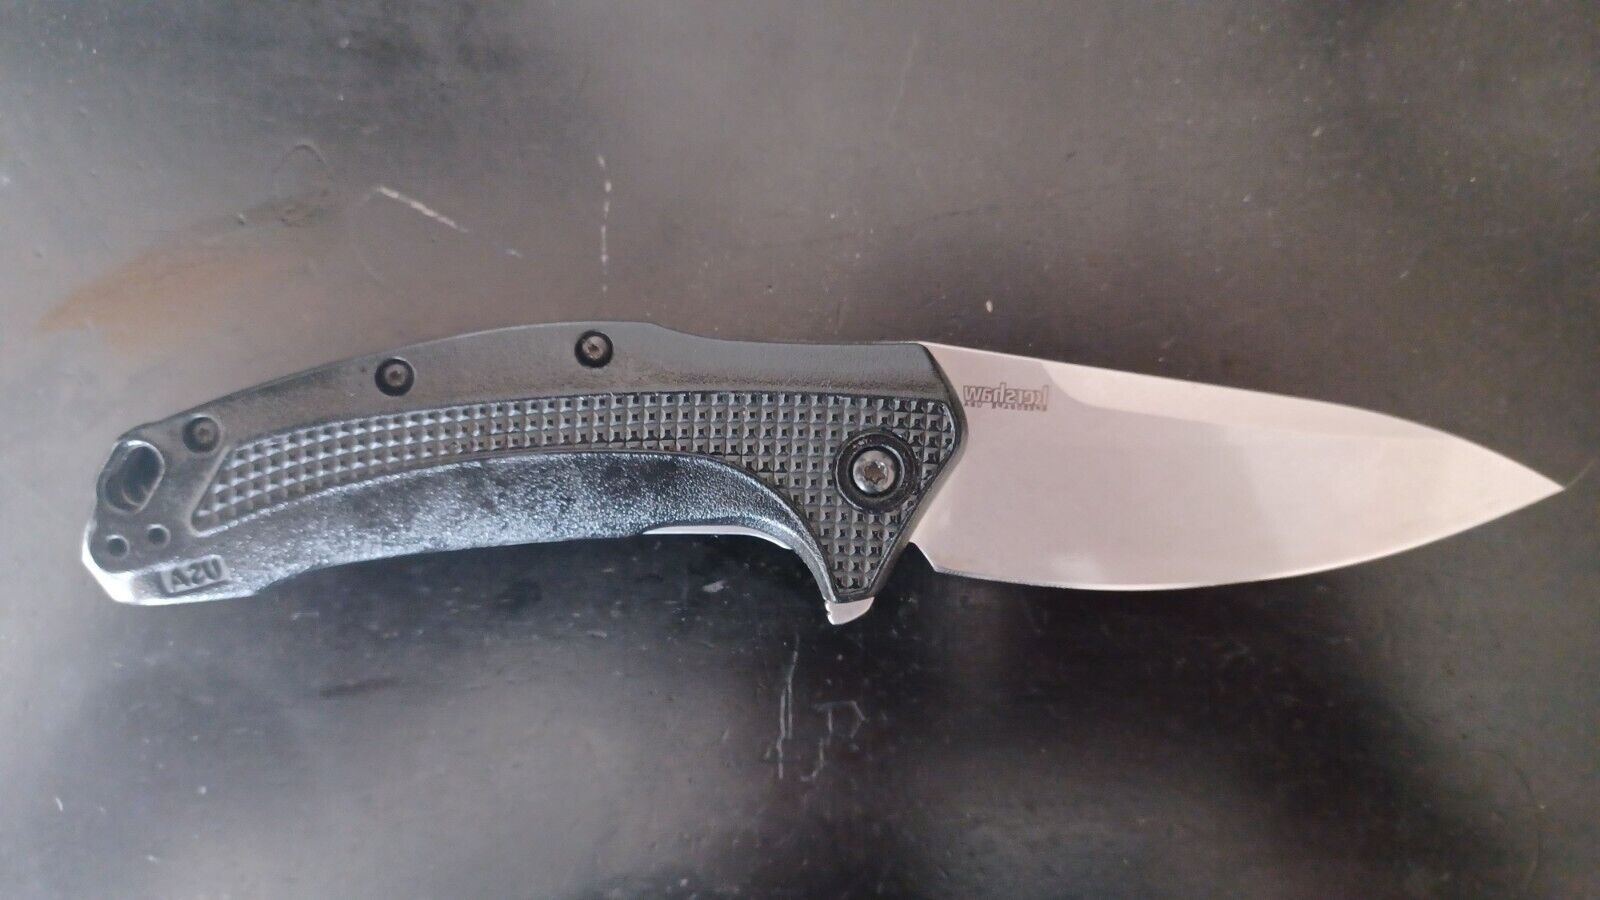 Kershaw 1776 Made in the US. Unused